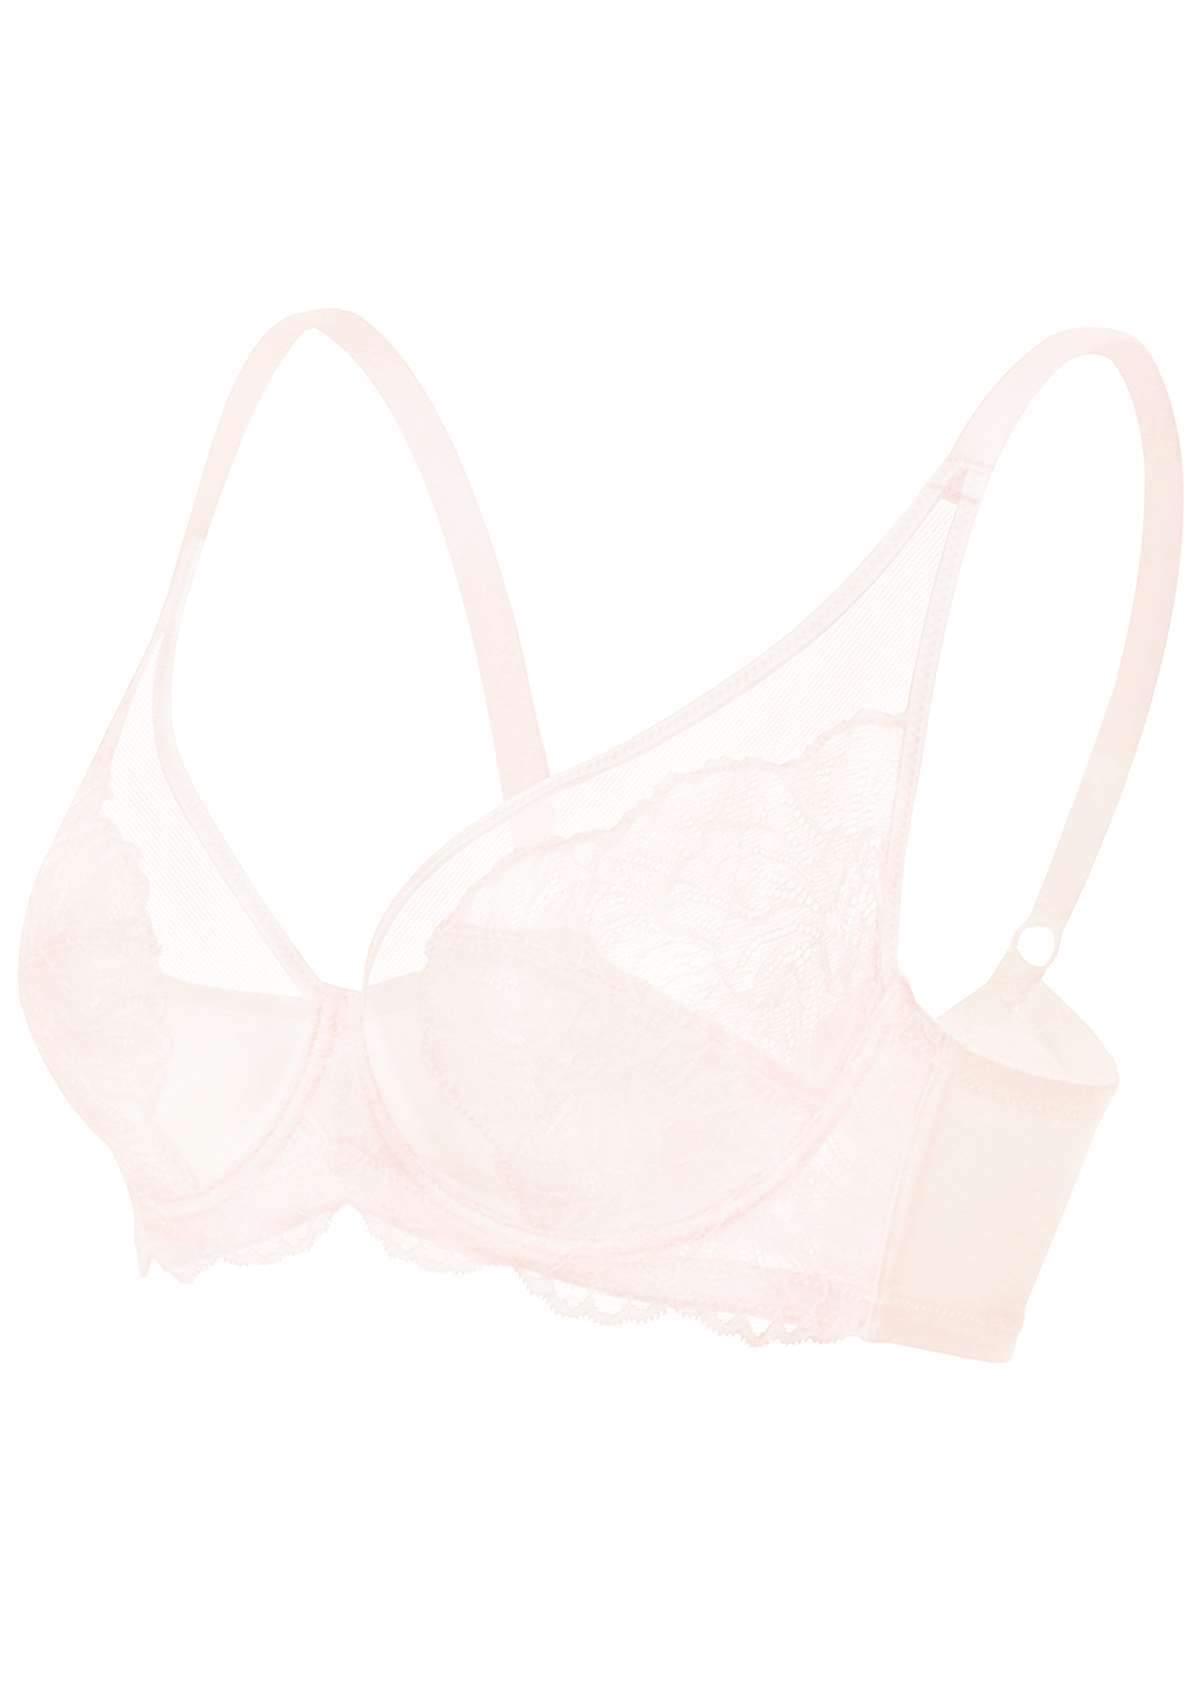 HSIA Blossom Sheer Lace Bra: Comfortable Underwire Bra For Big Busts - Dusty Peach / 38 / D